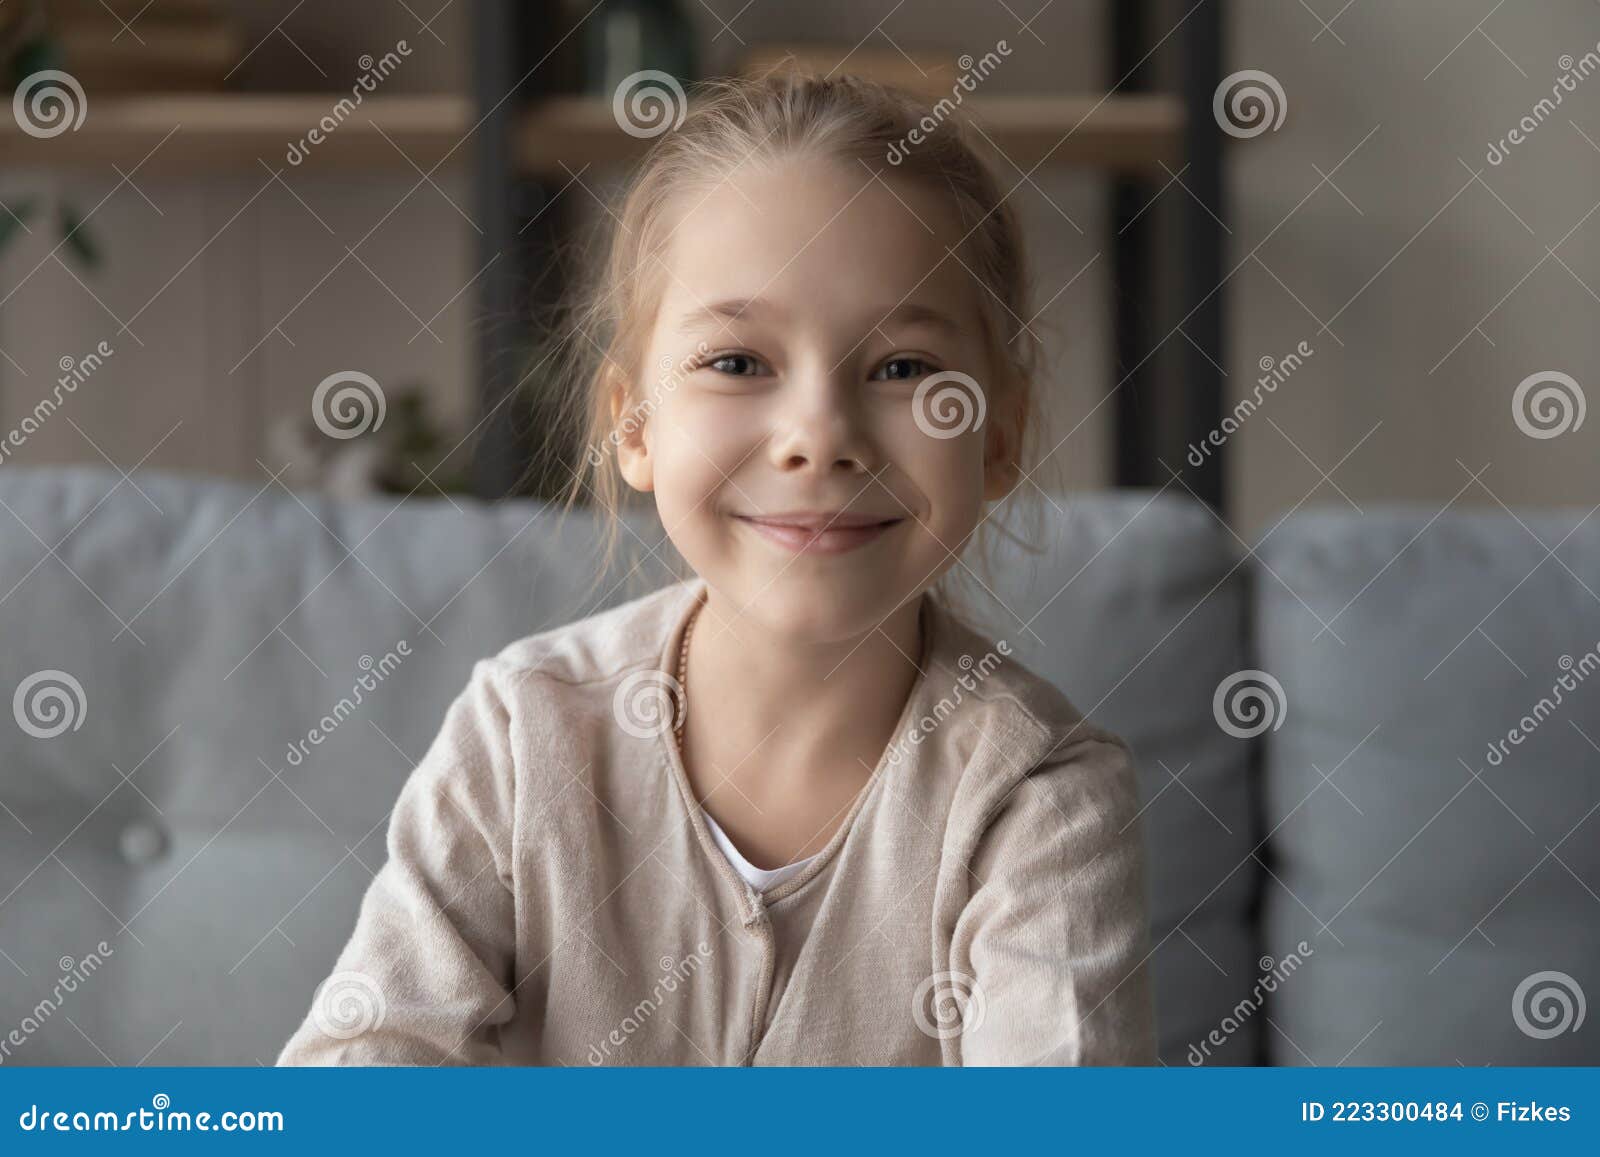 Little Girl Sitting on Couch Looking at Camera Making Videocall Stock Photo  - Image of chat, people: 223300484